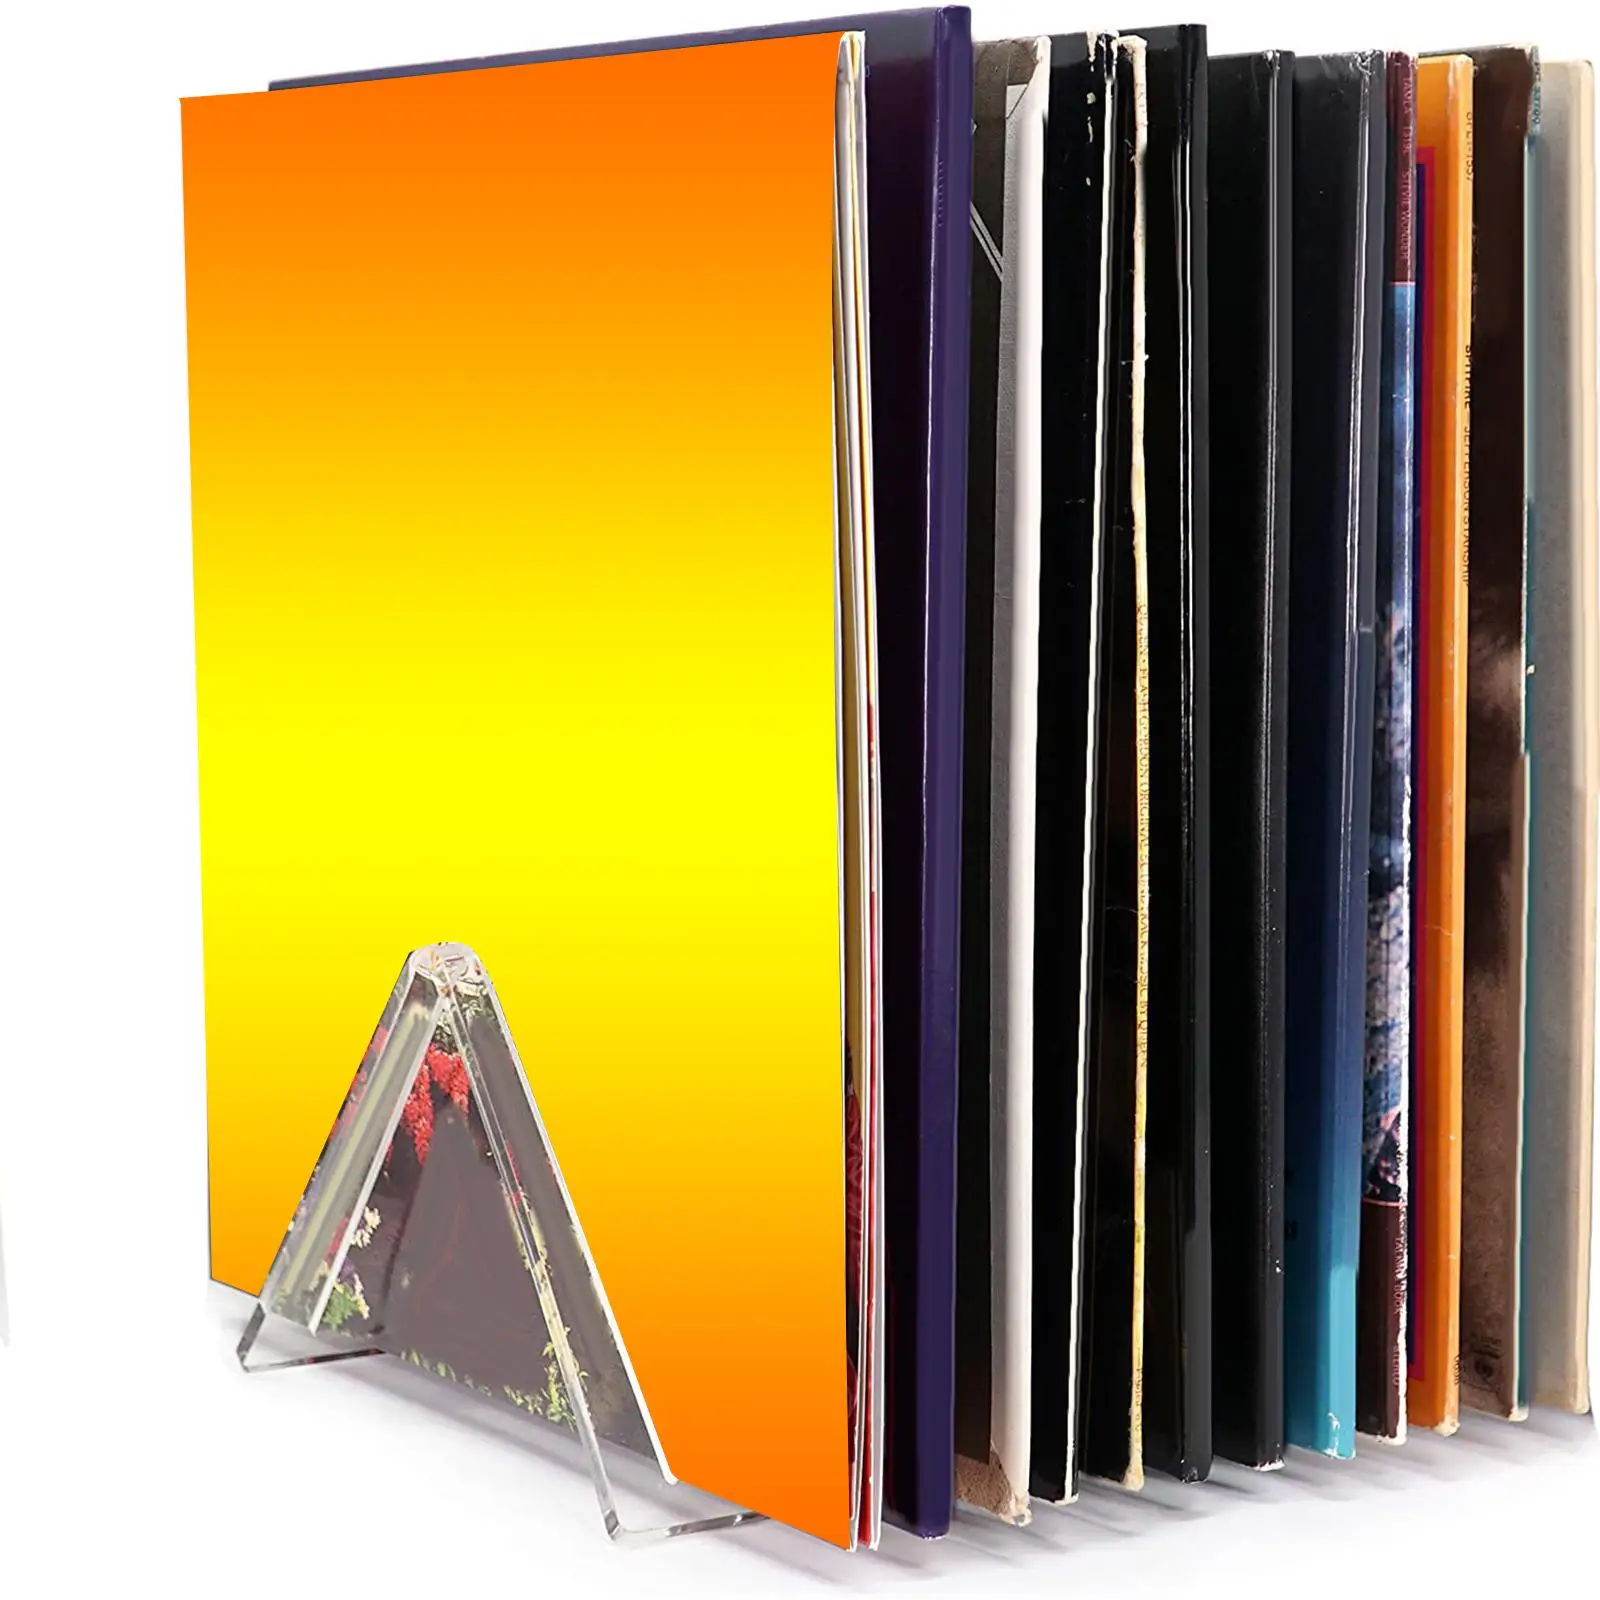 Triangle Vinyl Record Rack Storage Countertop Holds 12LPs Holder for Albums Newspaper